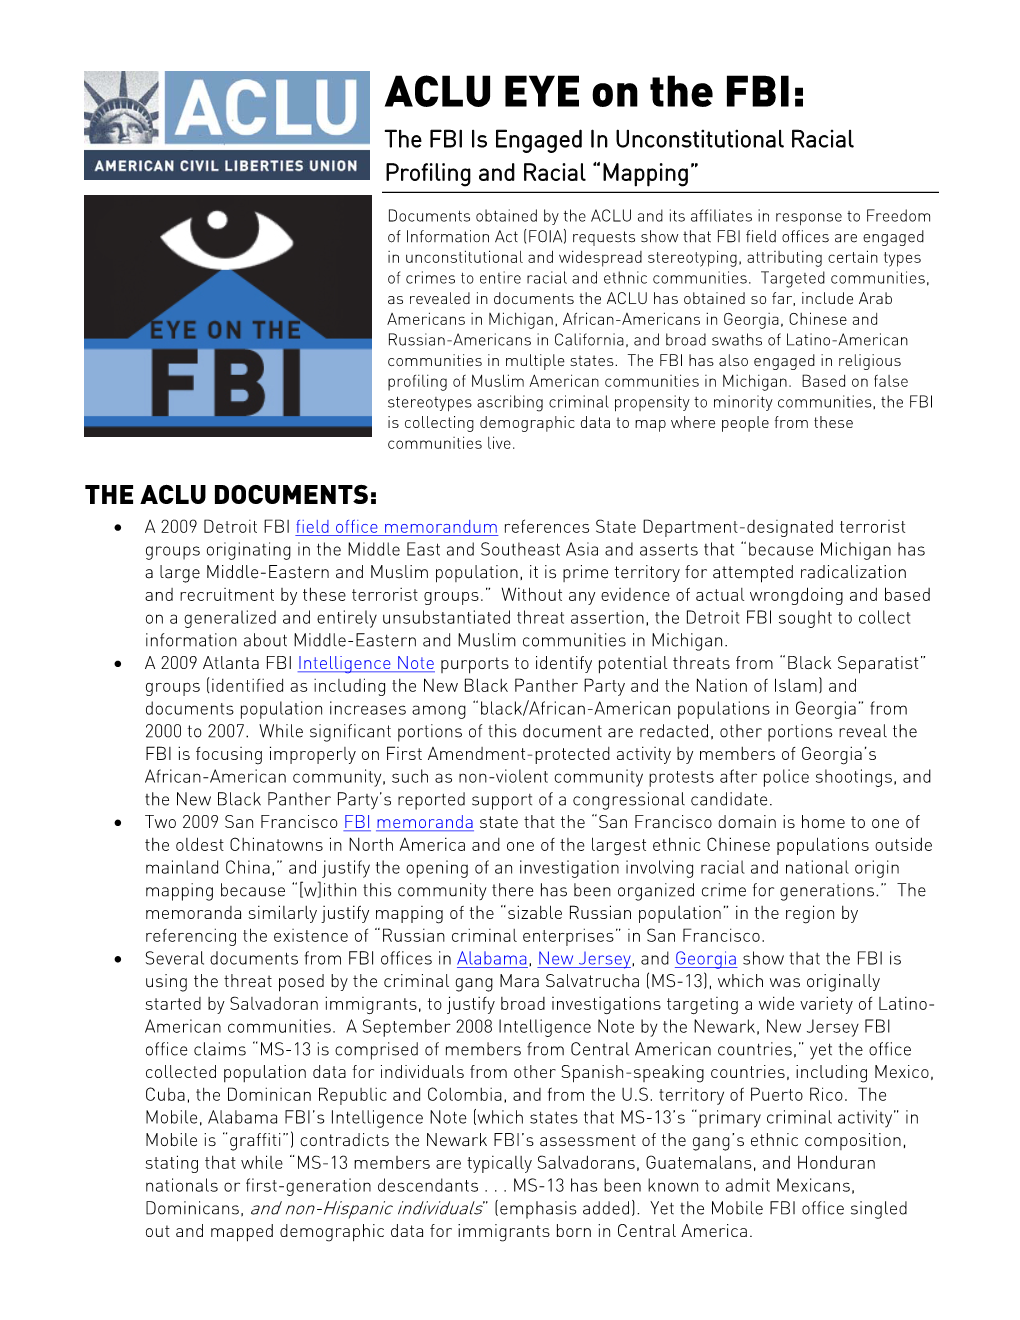 The FBI Is Engaged in Unconstitutional Racial Profiling and Racial “Mapping”